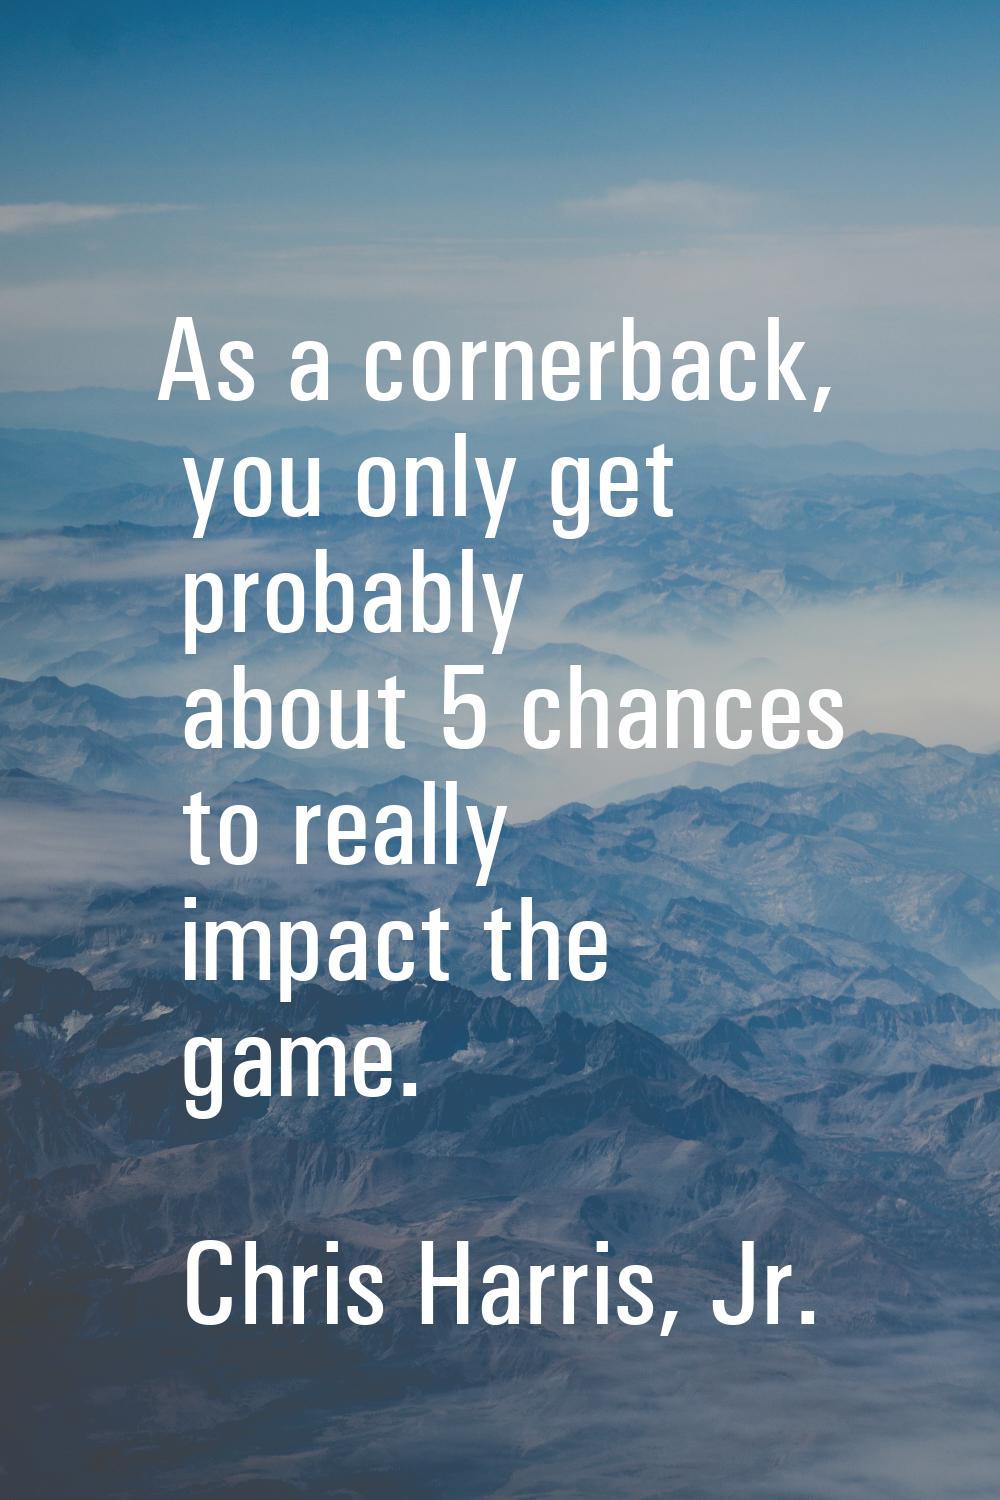 As a cornerback, you only get probably about 5 chances to really impact the game.